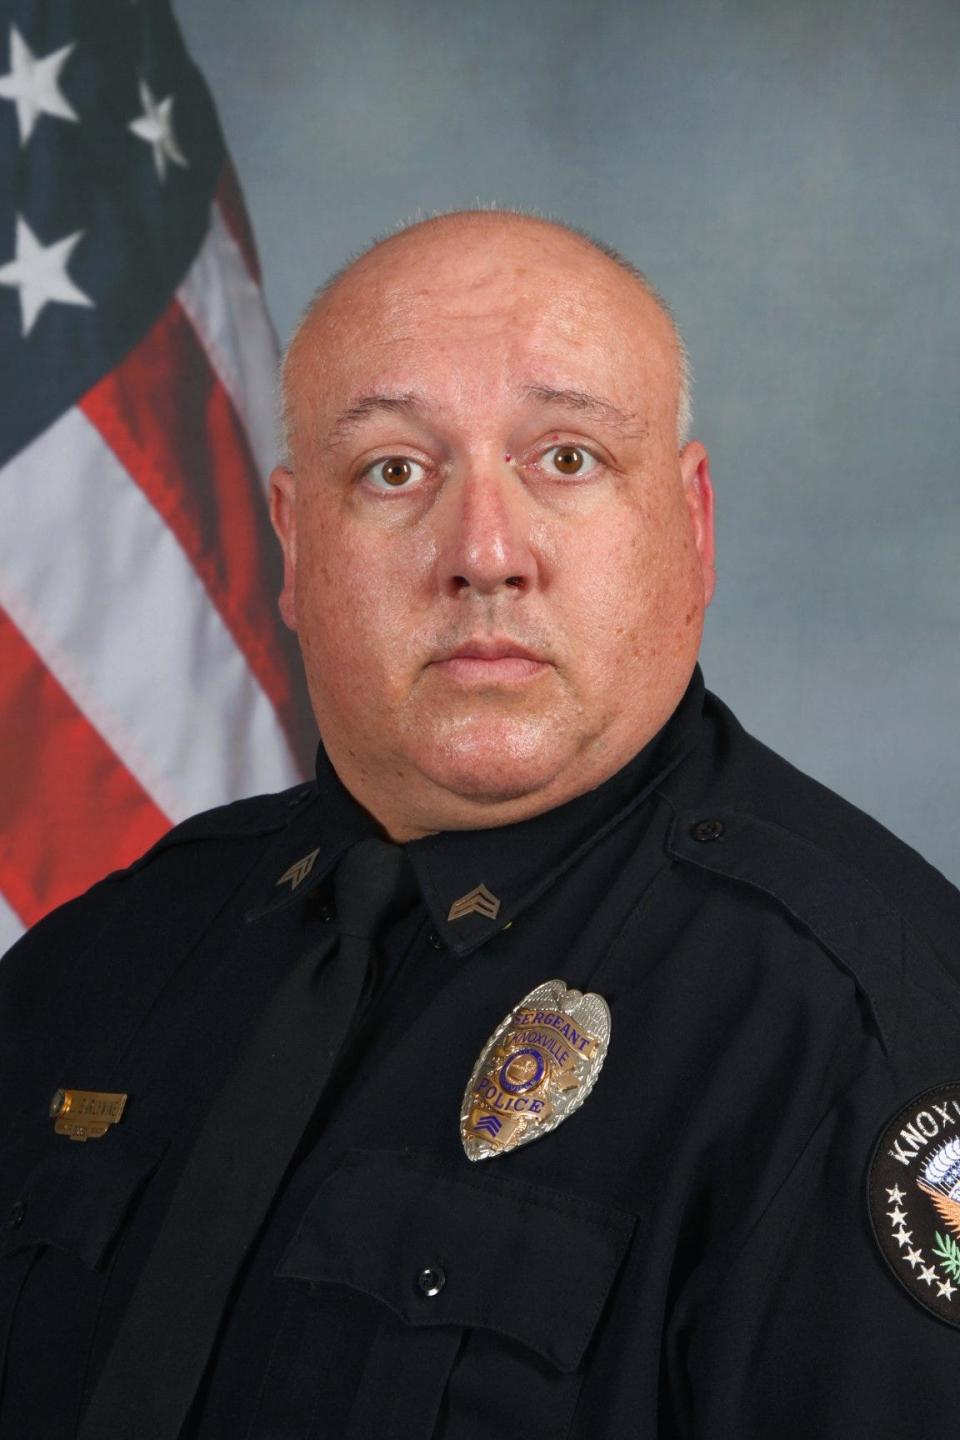 Knoxville Police Lt. Lance Earlywine